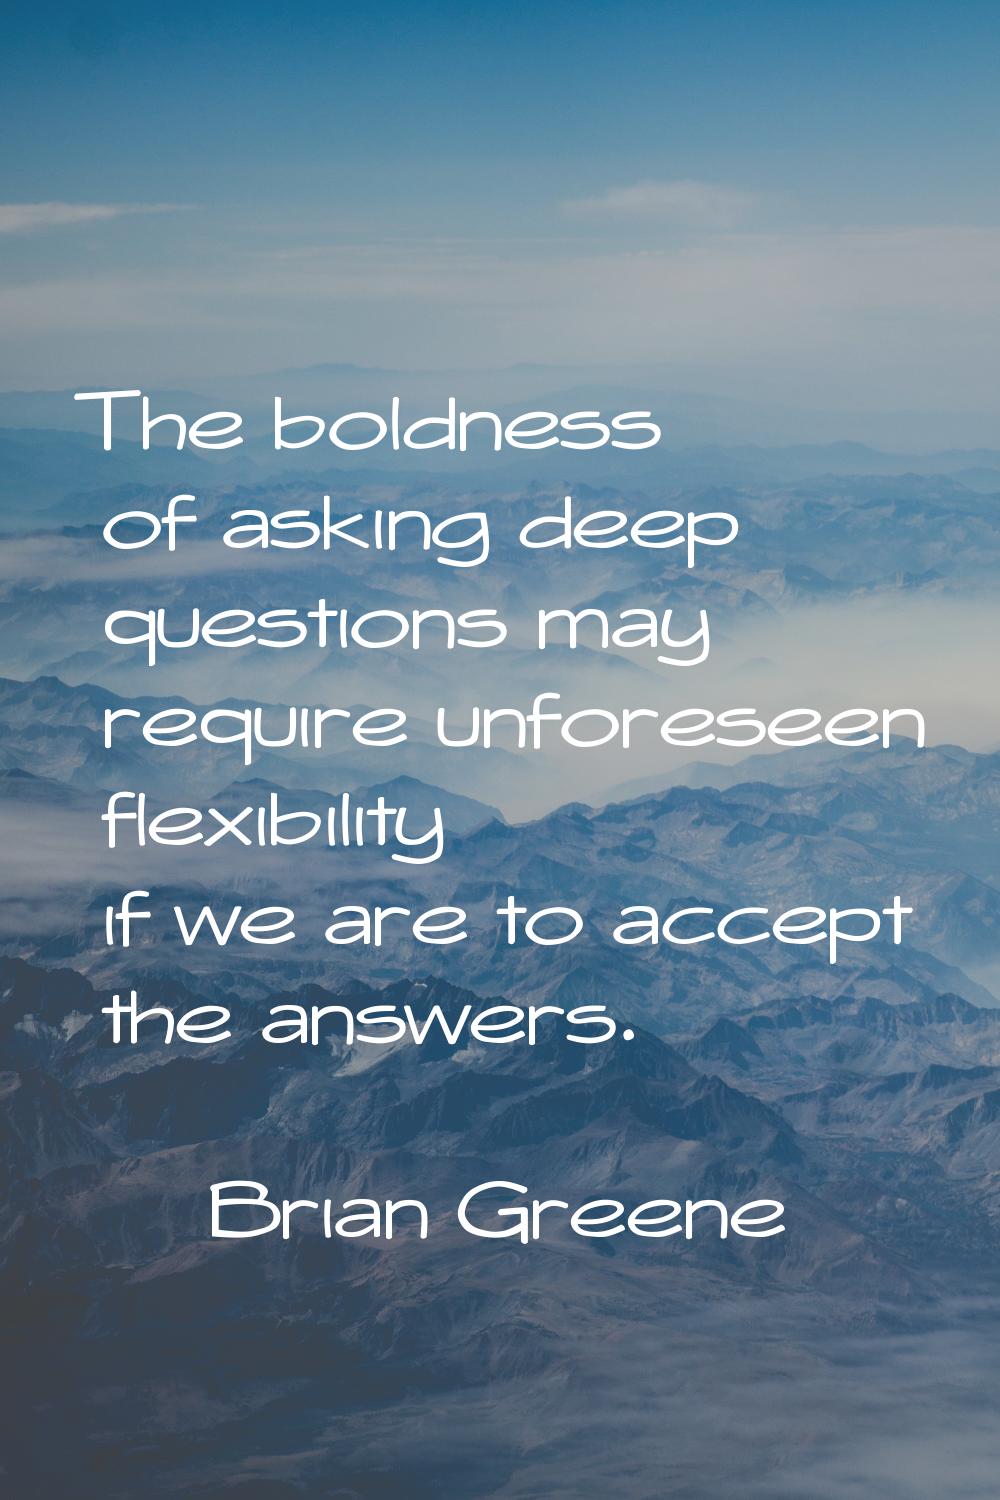 The boldness of asking deep questions may require unforeseen flexibility if we are to accept the an